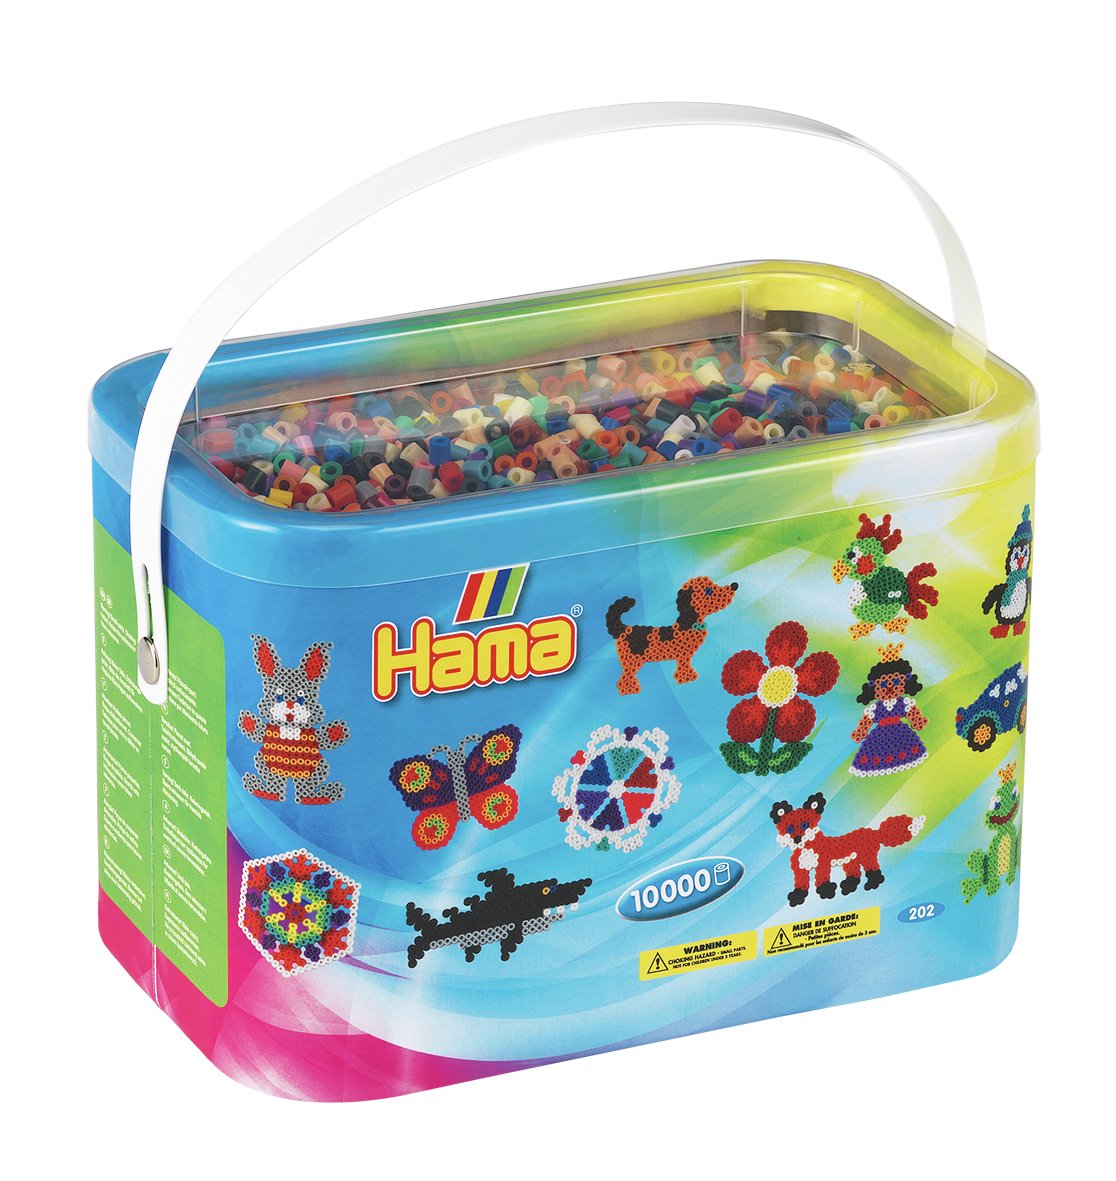 Hama Beads 10,000 Beads and Pegboards Bucket Reviews